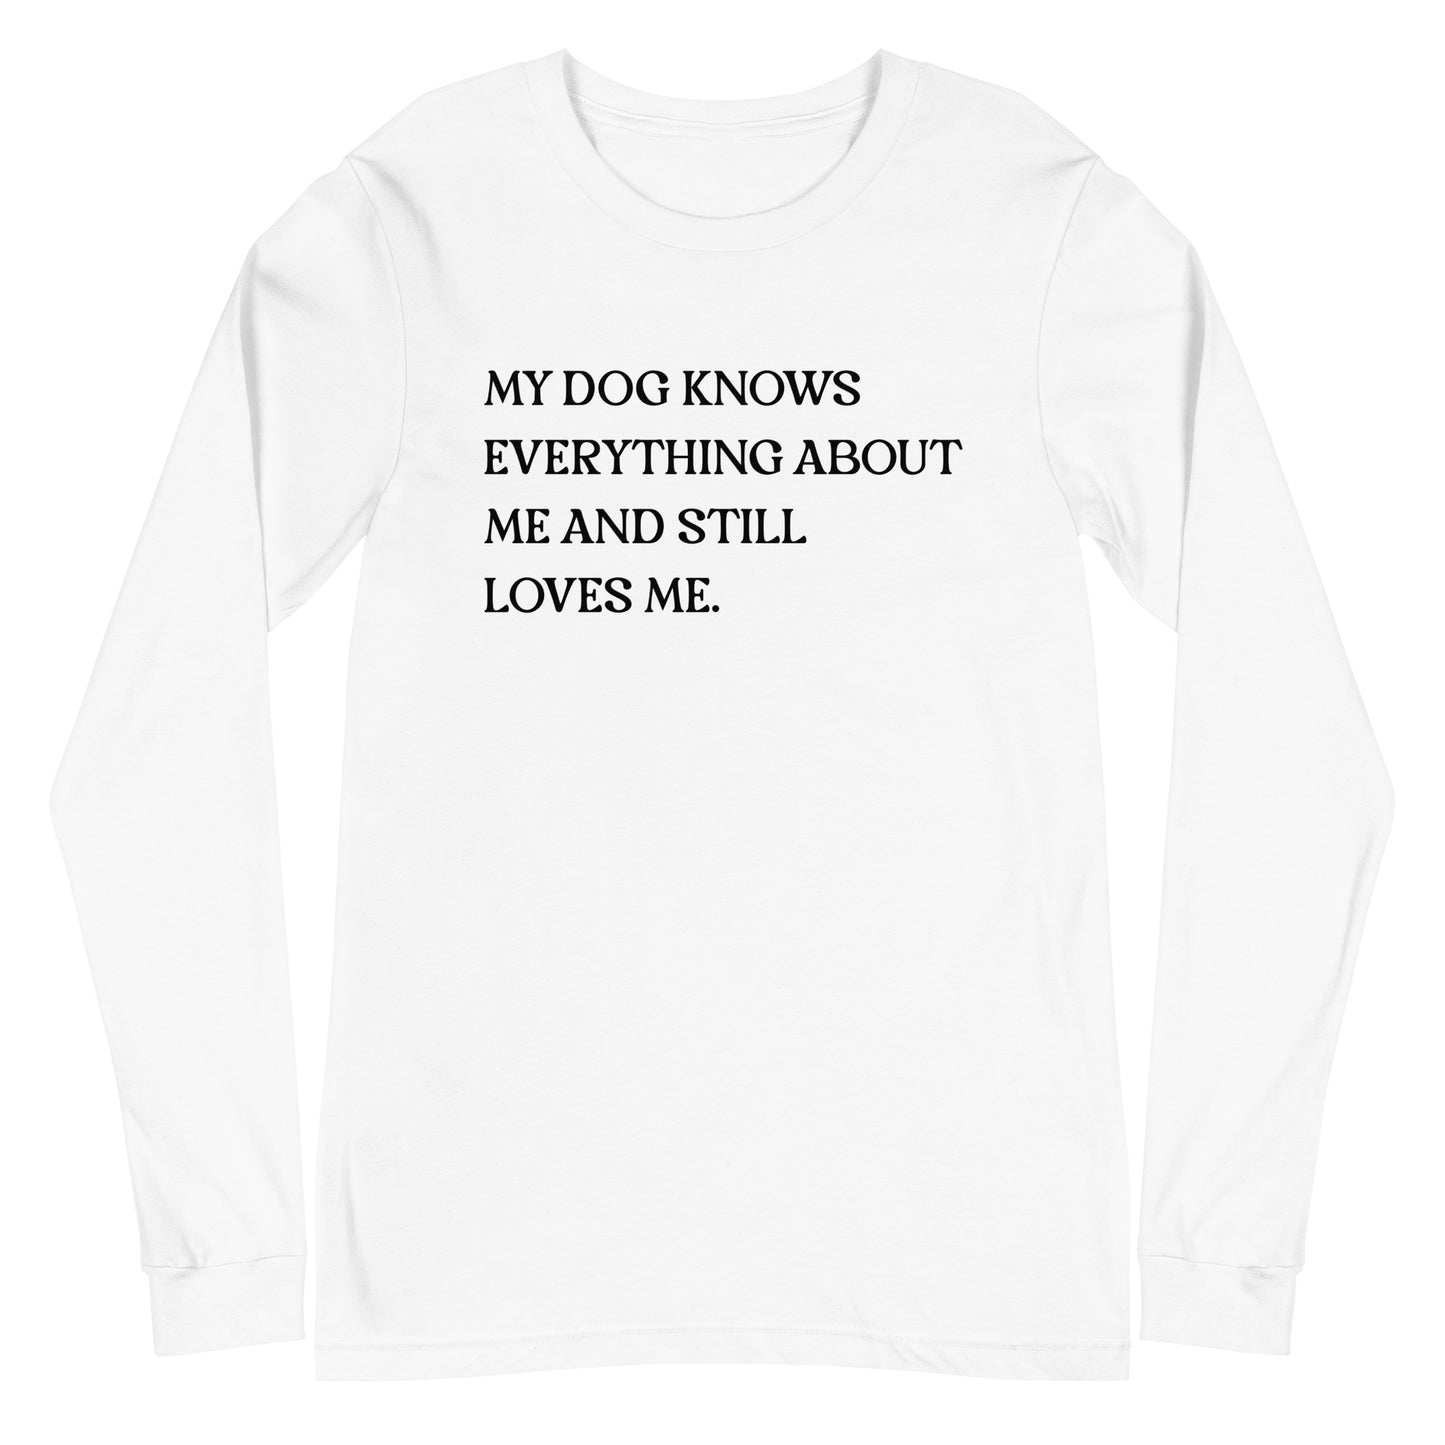 My Dog Knows Everything About Me and Still Loves Me Unisex Long Sleeve Tee